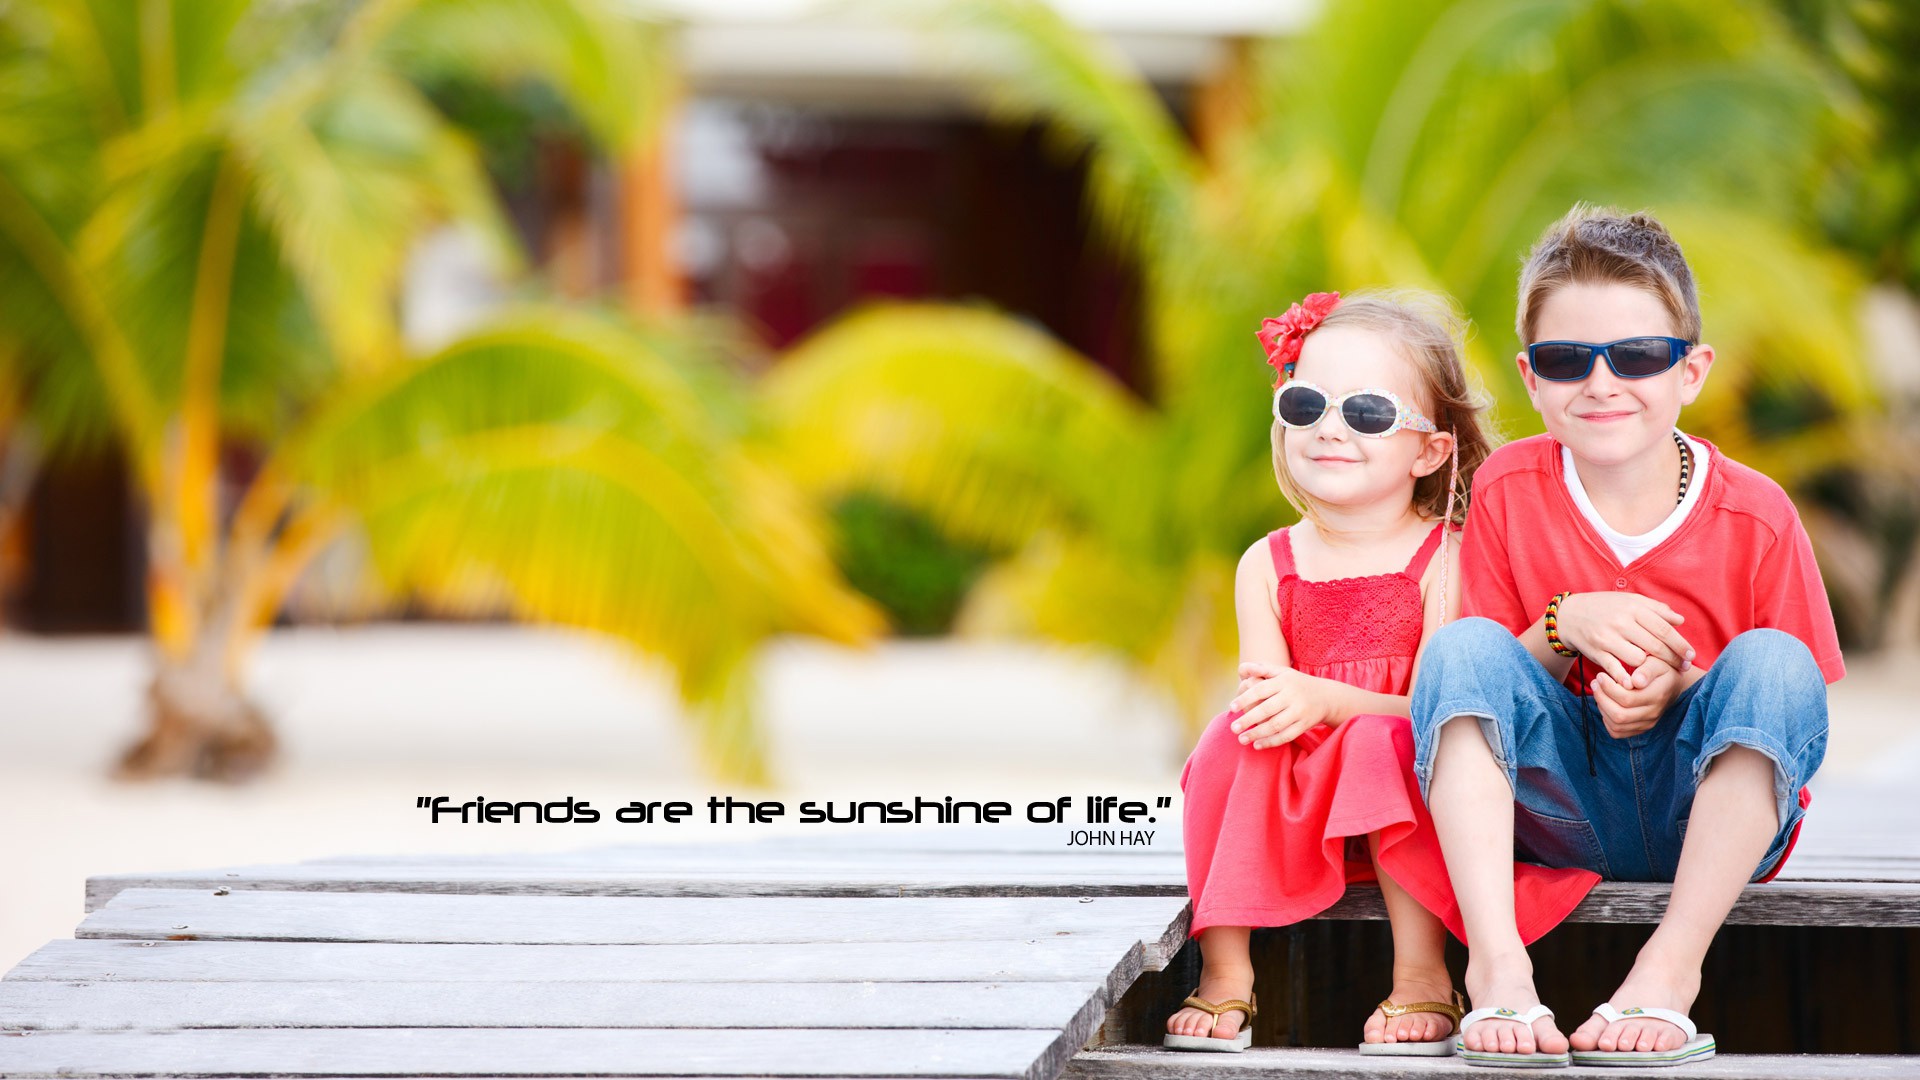 Friend Are The Sunshine Of Life HD Wallpaper   New HD Wallpapers